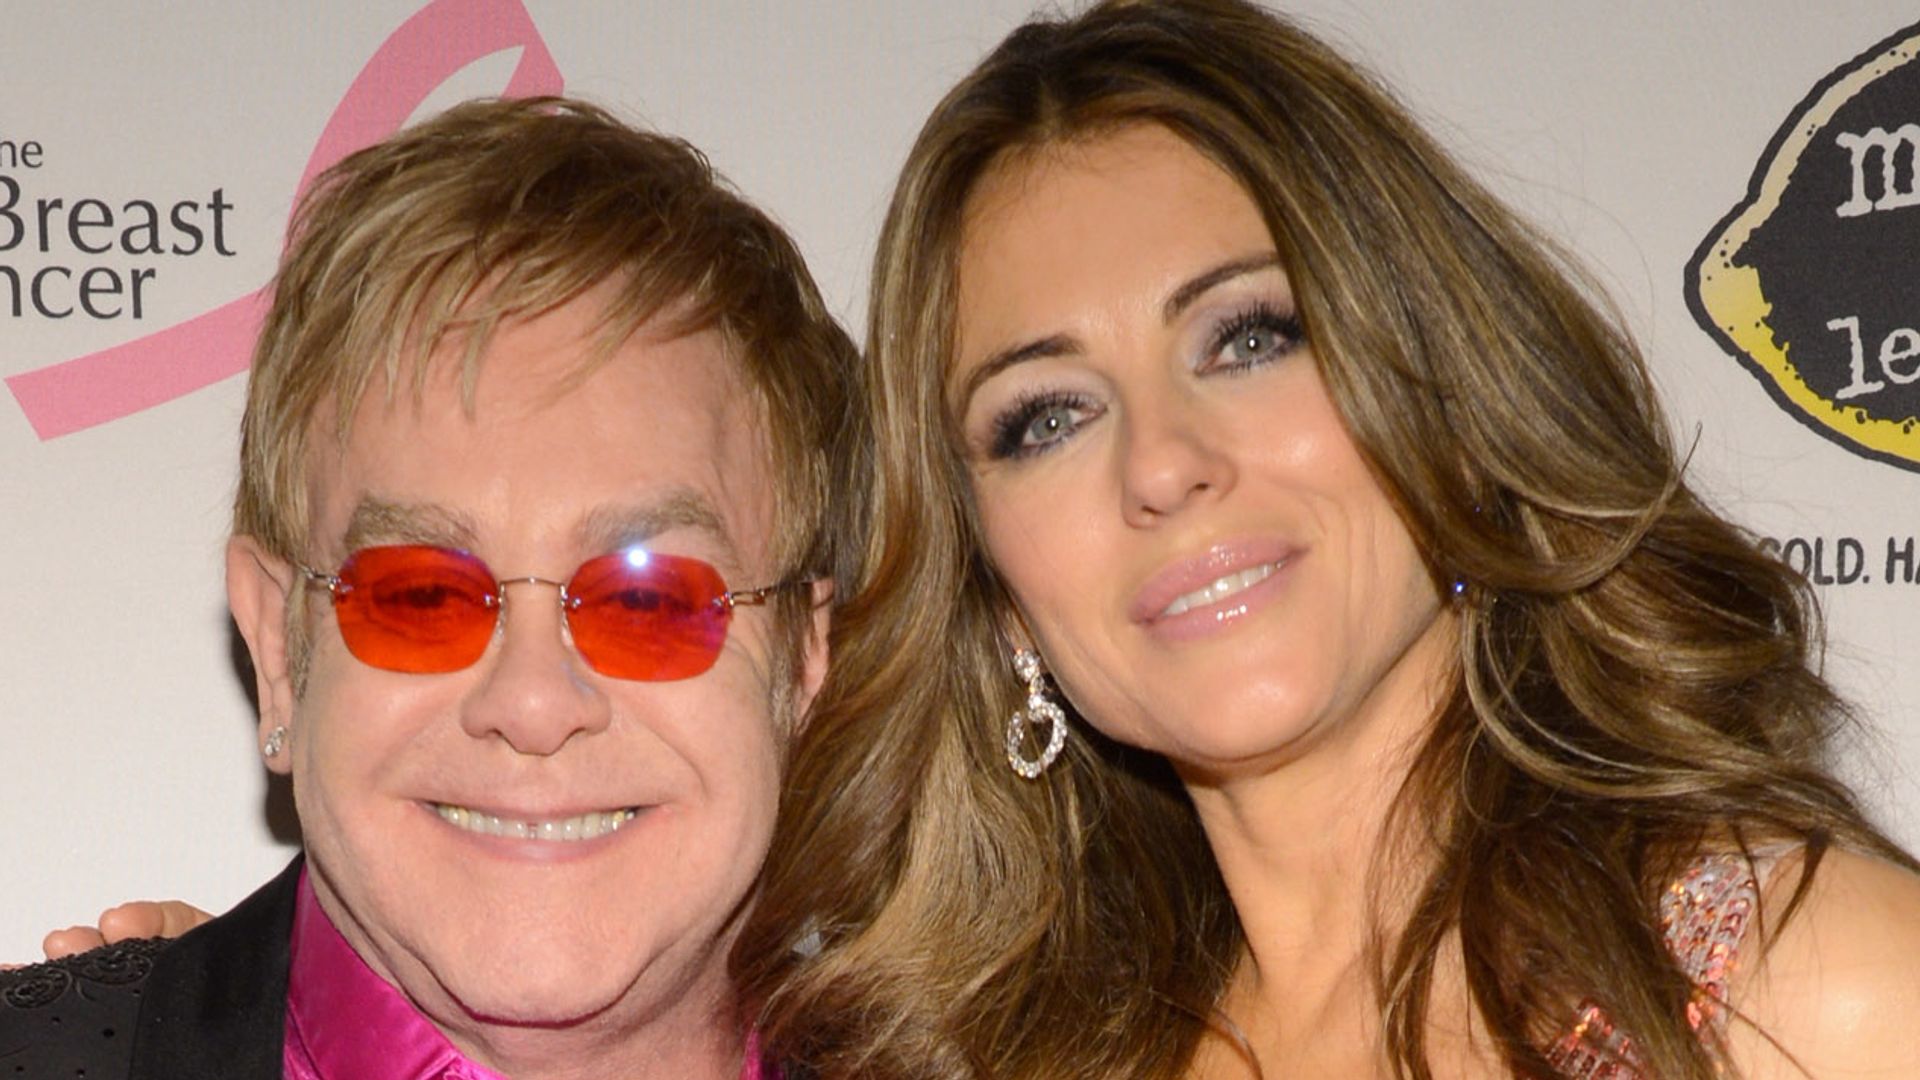 Elton John and Elizabeth Hurley attend the Breast Cancer Foundation's Hot Pink Party 